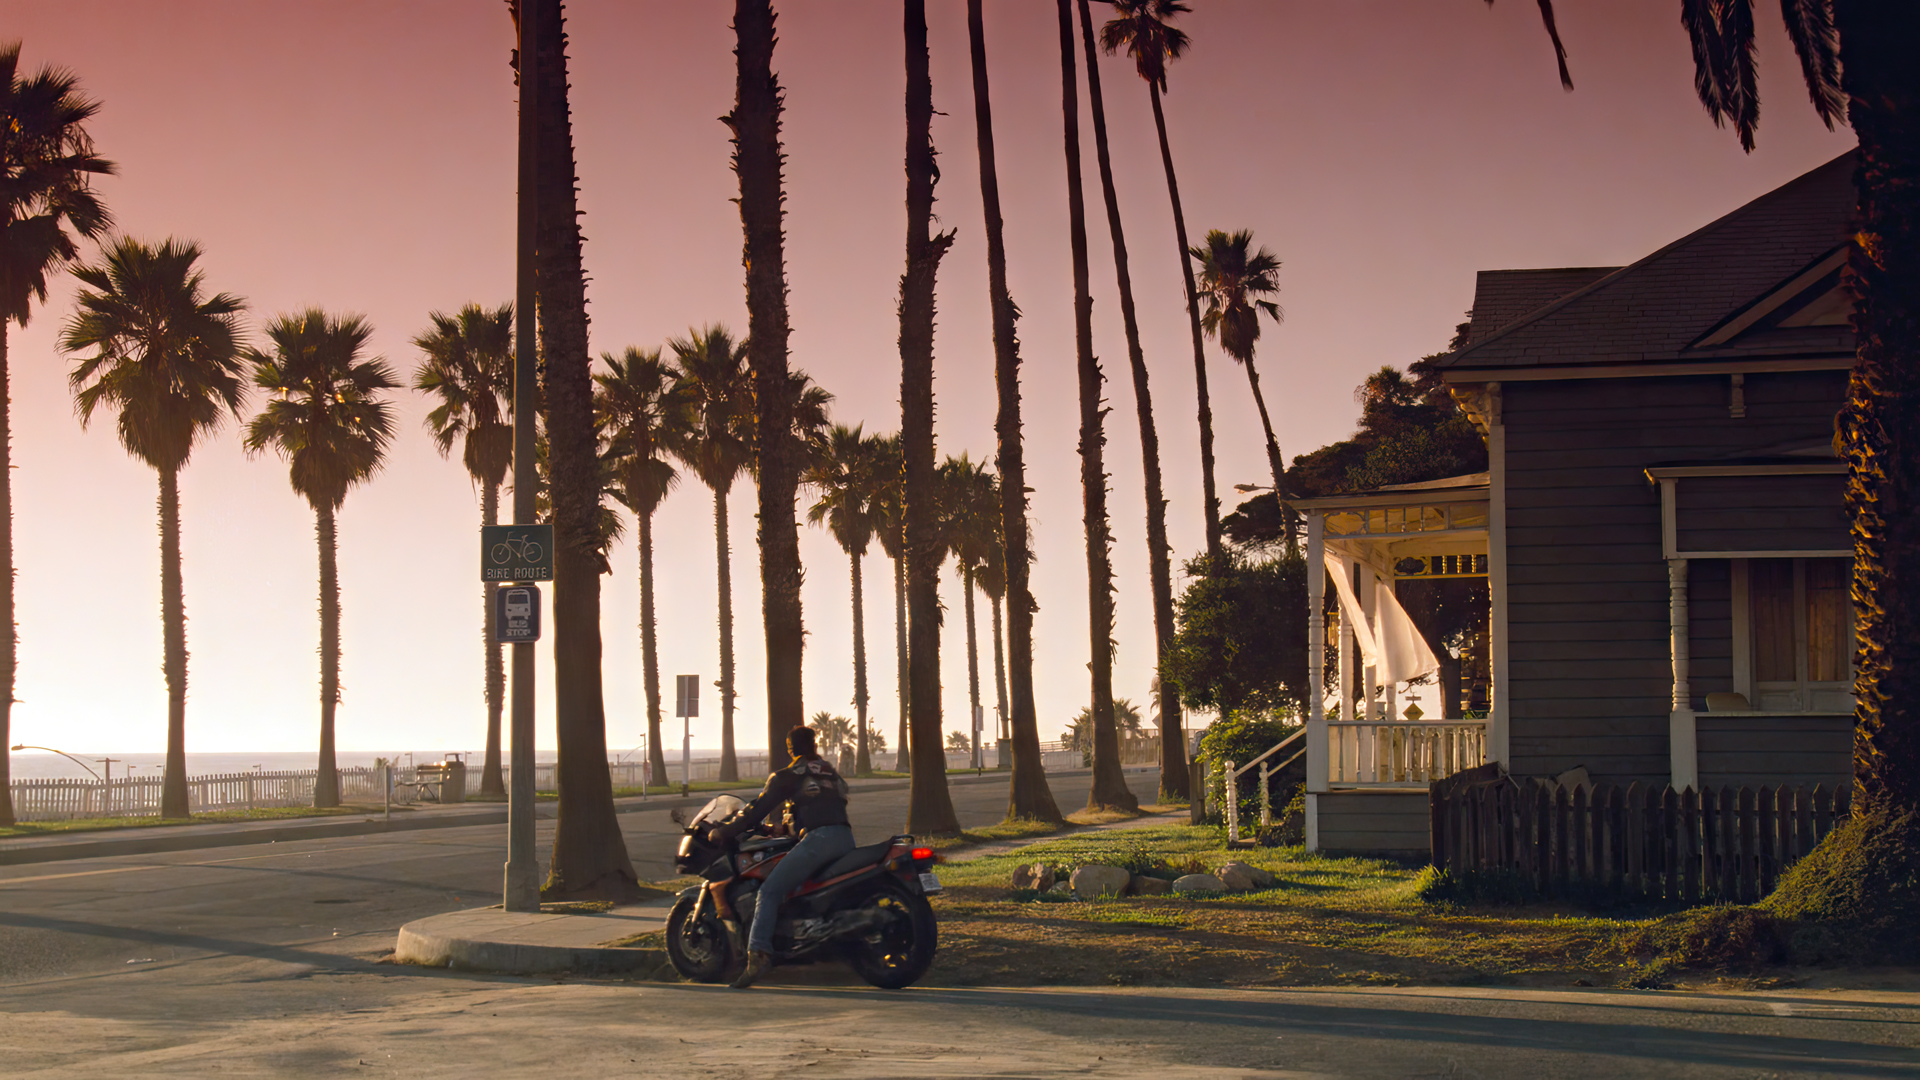 Top Gun Movies Film Stills Tom Cruise Actor Motorcycle Palm Trees Street House Road Sign Sky Sunset  1920x1080